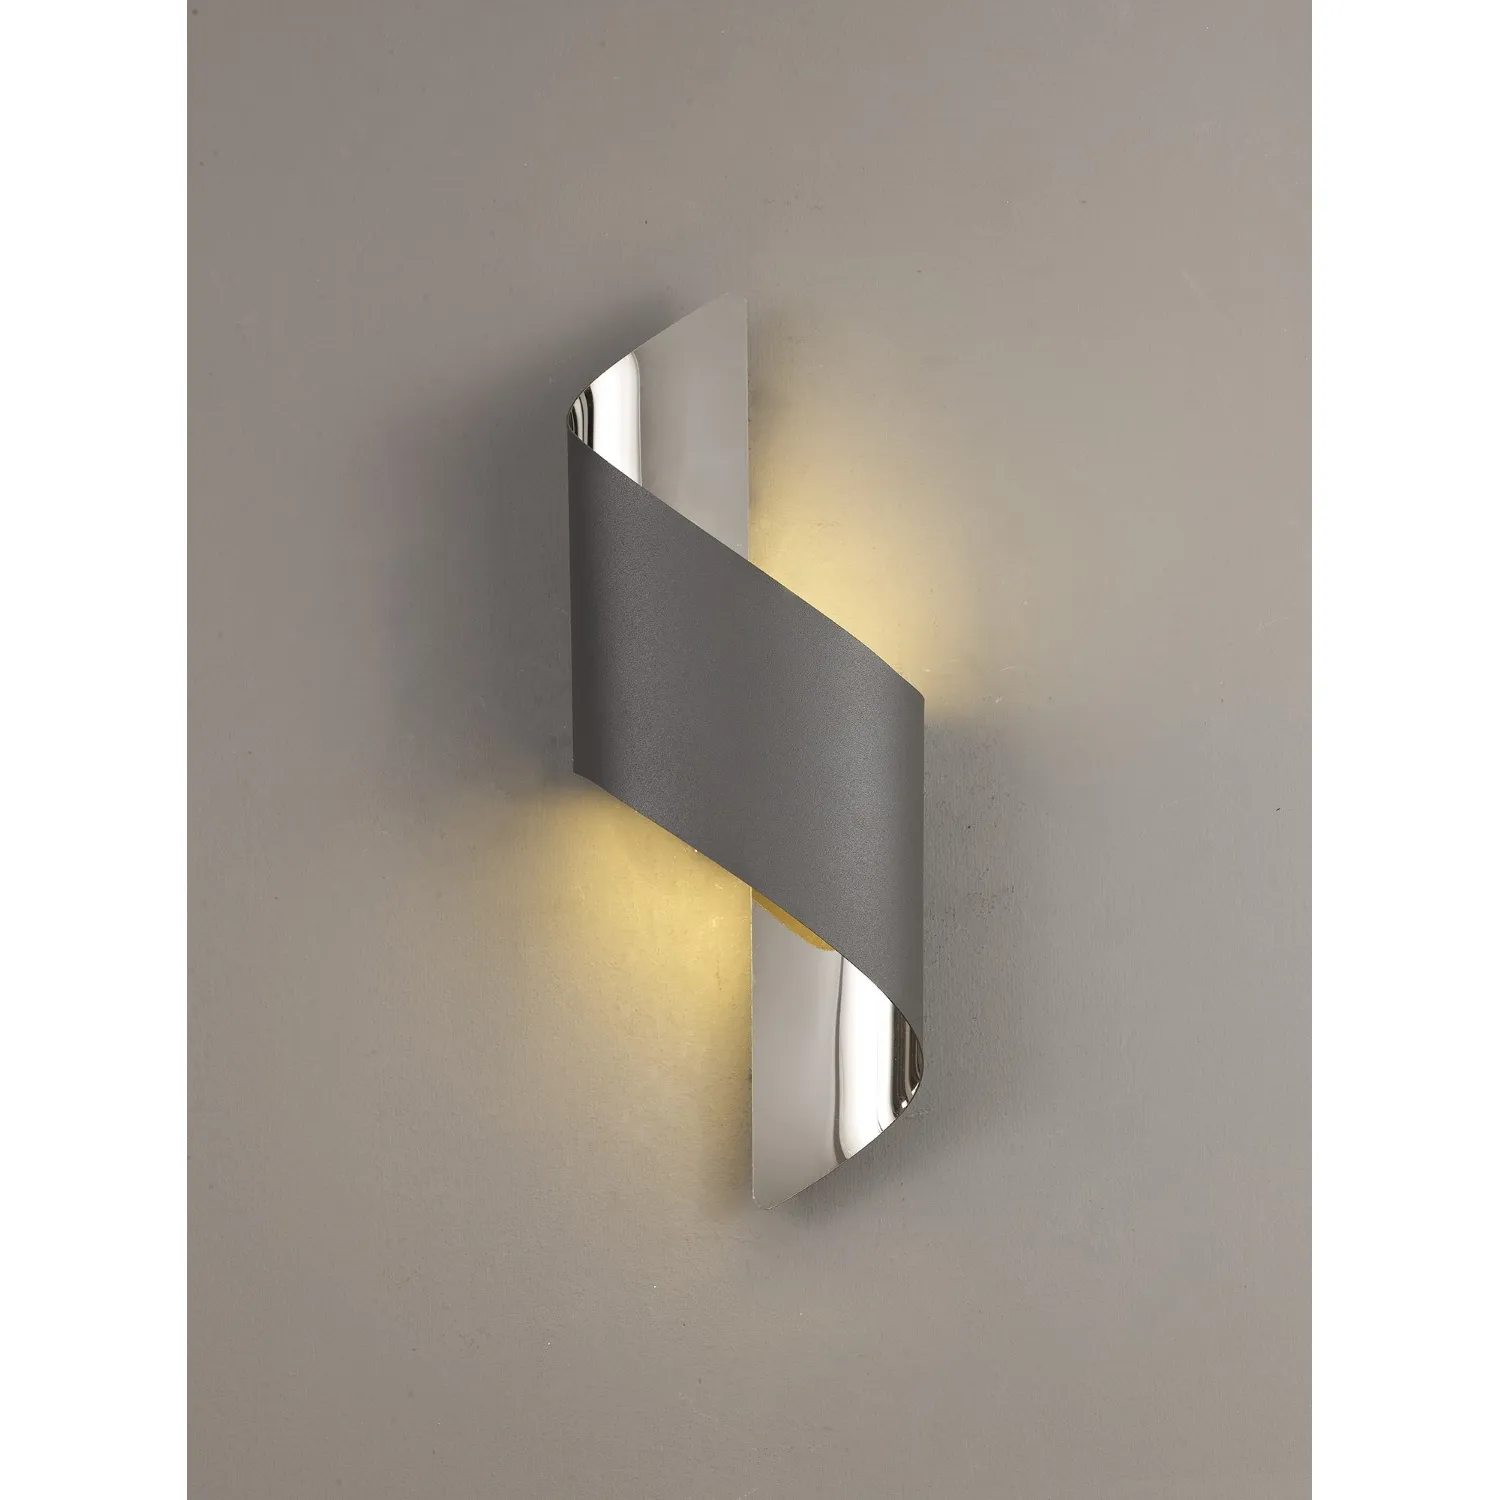 Chichester Wall Lamp Small, 1 x 8W LED, 3000K, 640lm, Anthracite Polished Chrome, 3yrs Warranty